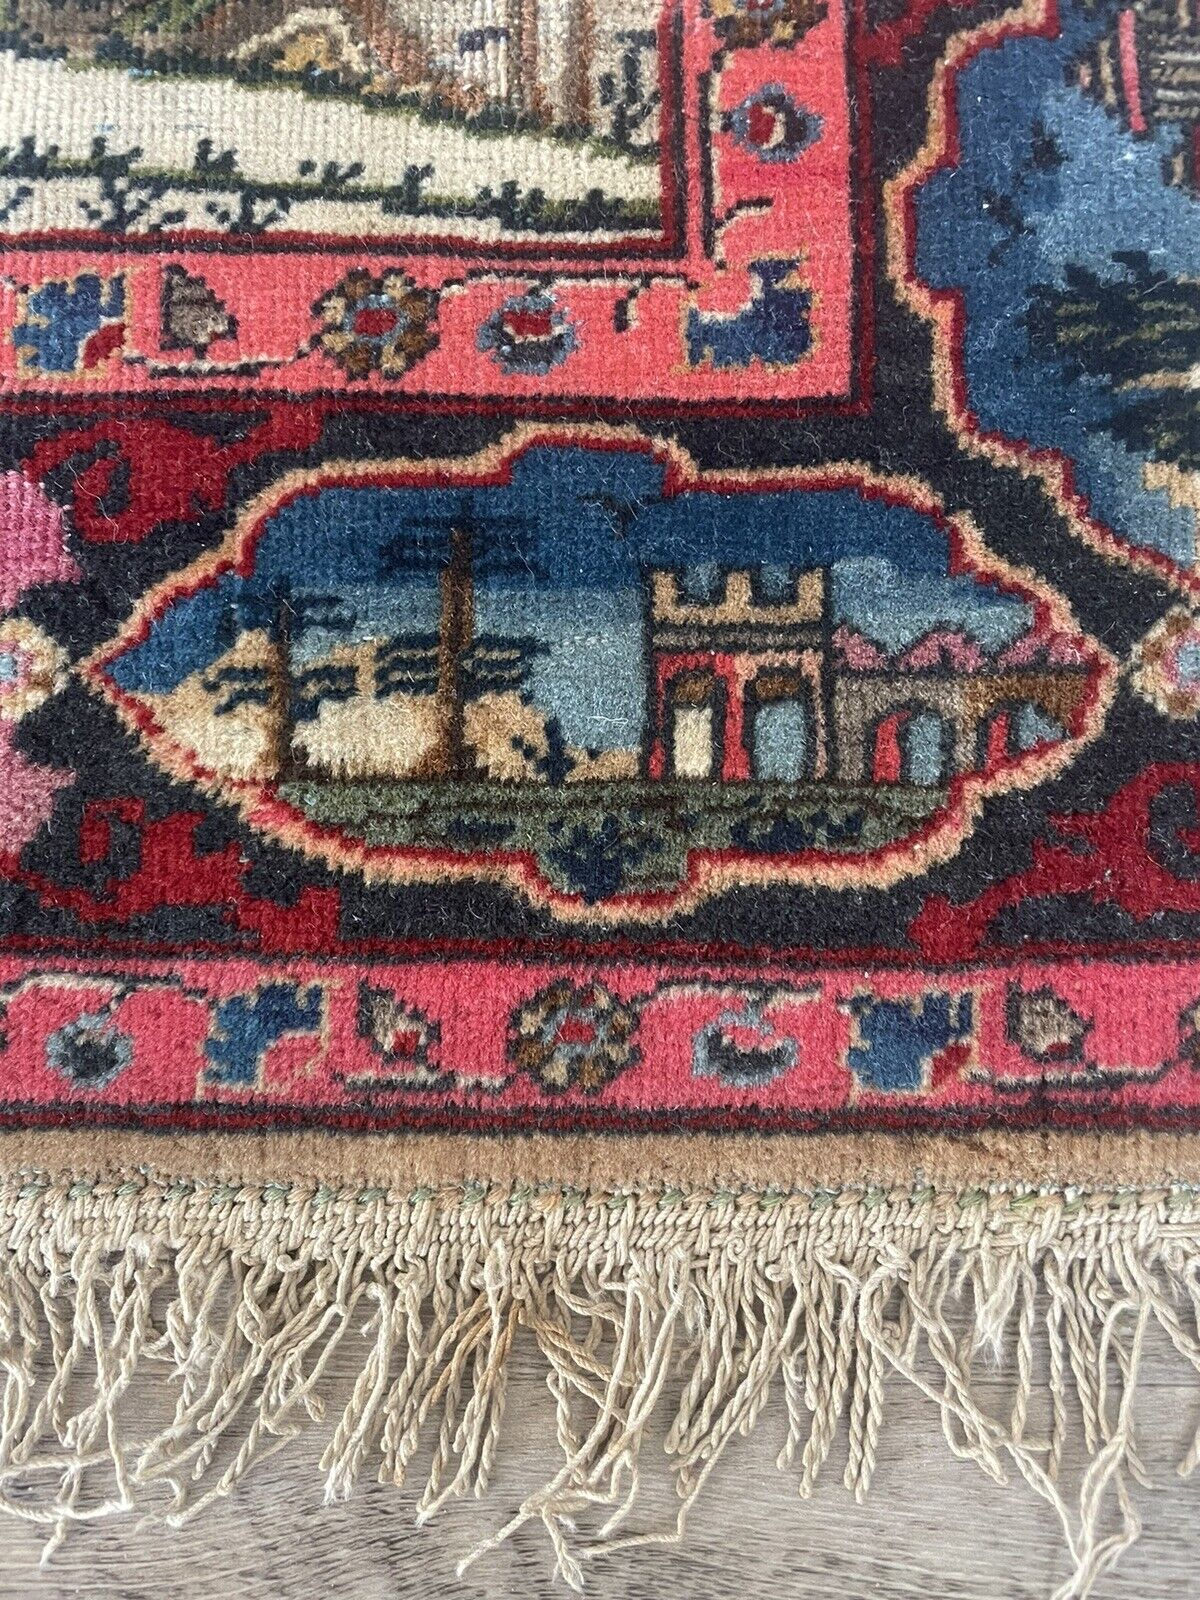 Close-up of rarity on Handmade Antique Persian Kashan Collectible Rug - Detailed view highlighting the rug's rarity as a collectible piece, enhancing its allure and value.